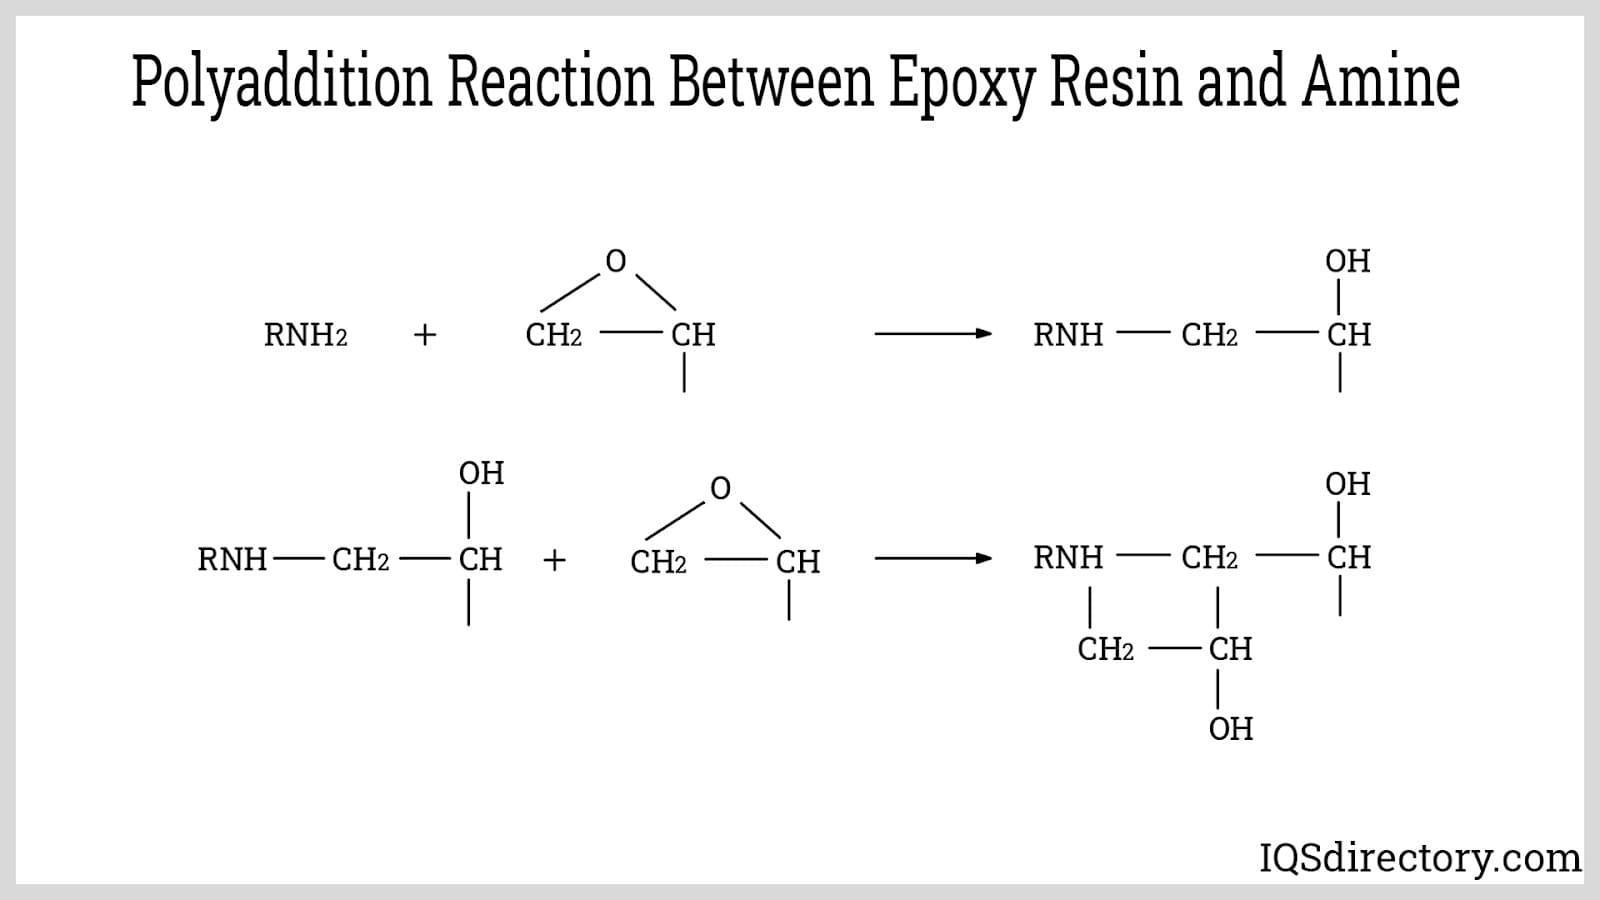 Polyaddition Reaction Between Epoxy Resin and Amine